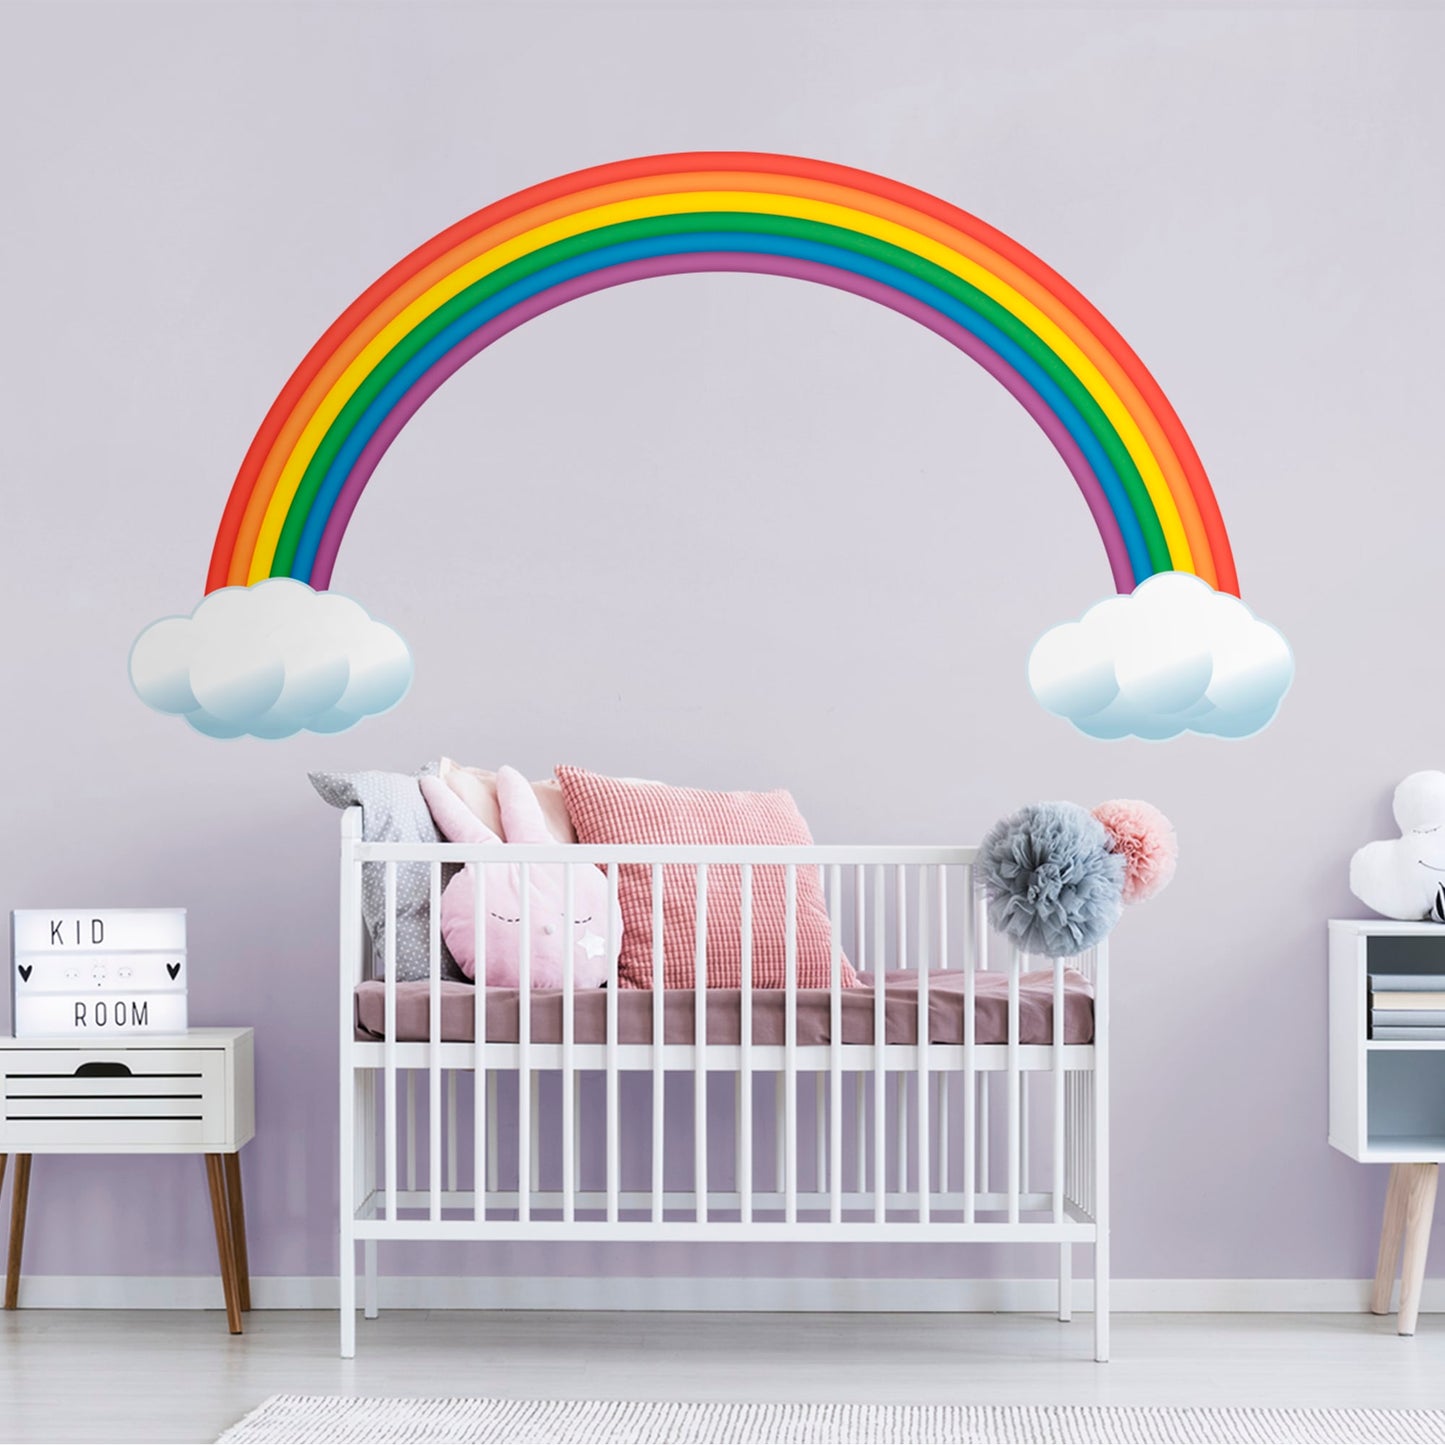 Rainbow: Collection - Removable Vinyl Decal